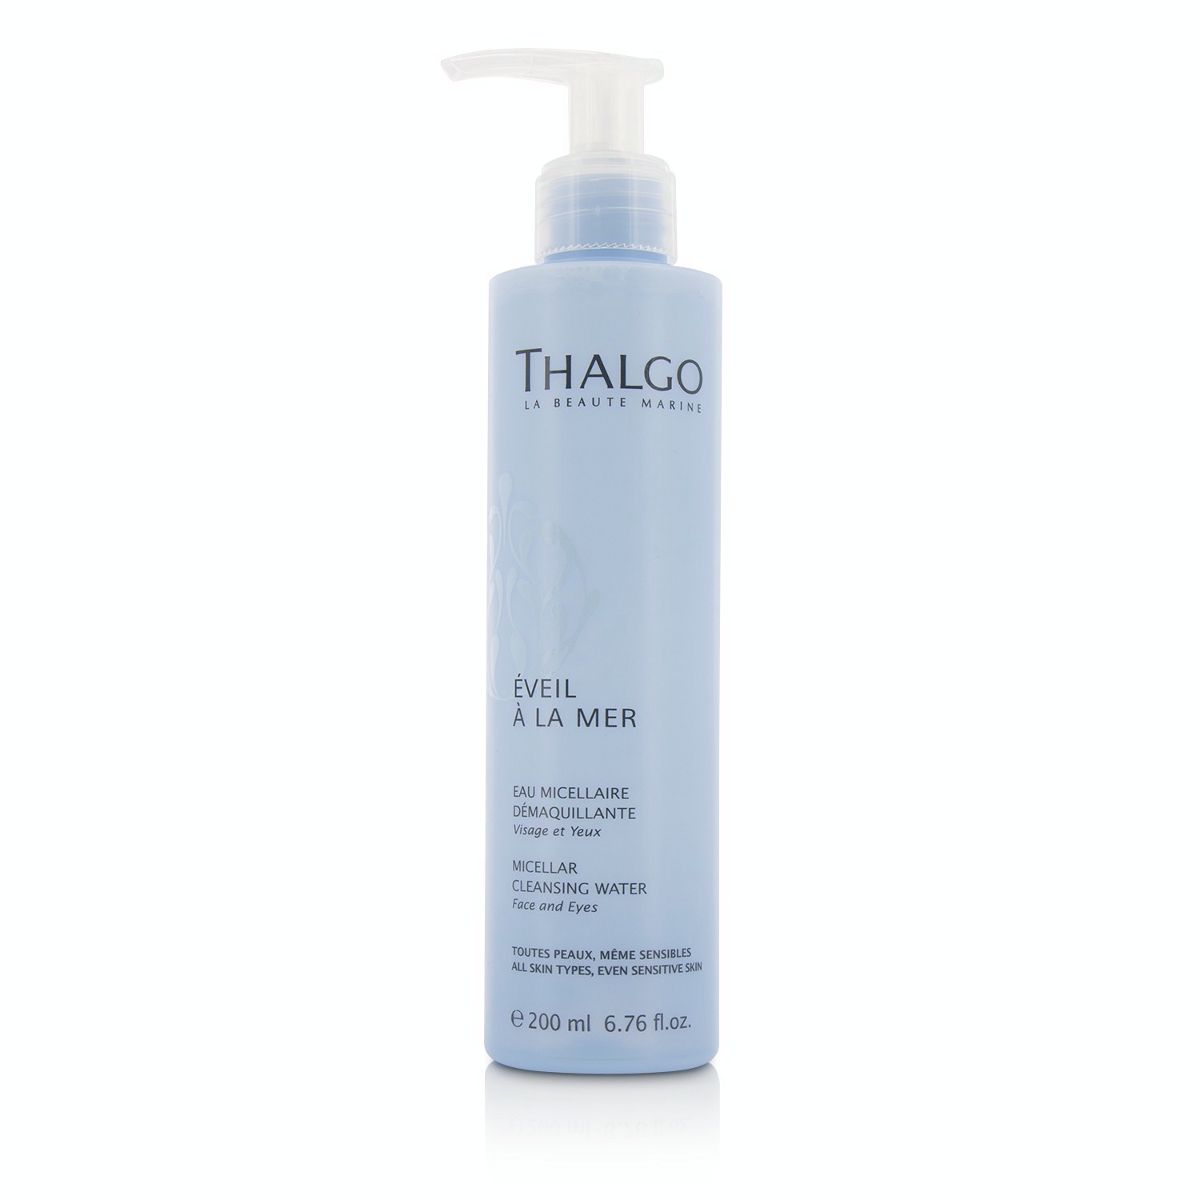 Eveil A La Mer Micellar Cleansing Water (Face  Eyes) - For All Skin Types Even Sensitive Skin Thalgo Image